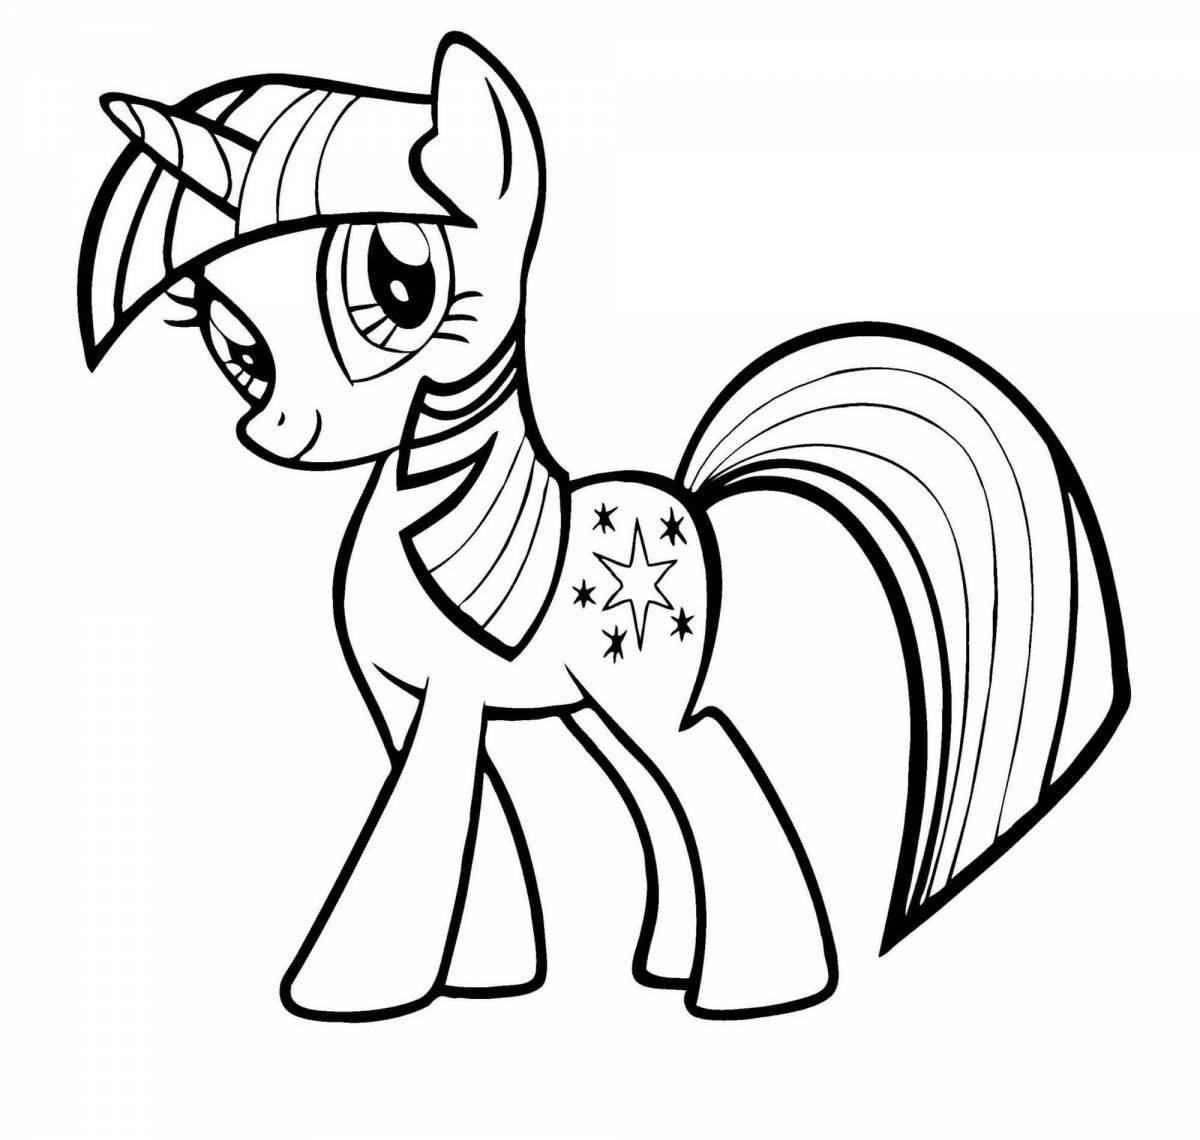 Radiant little pony coloring pages for kids